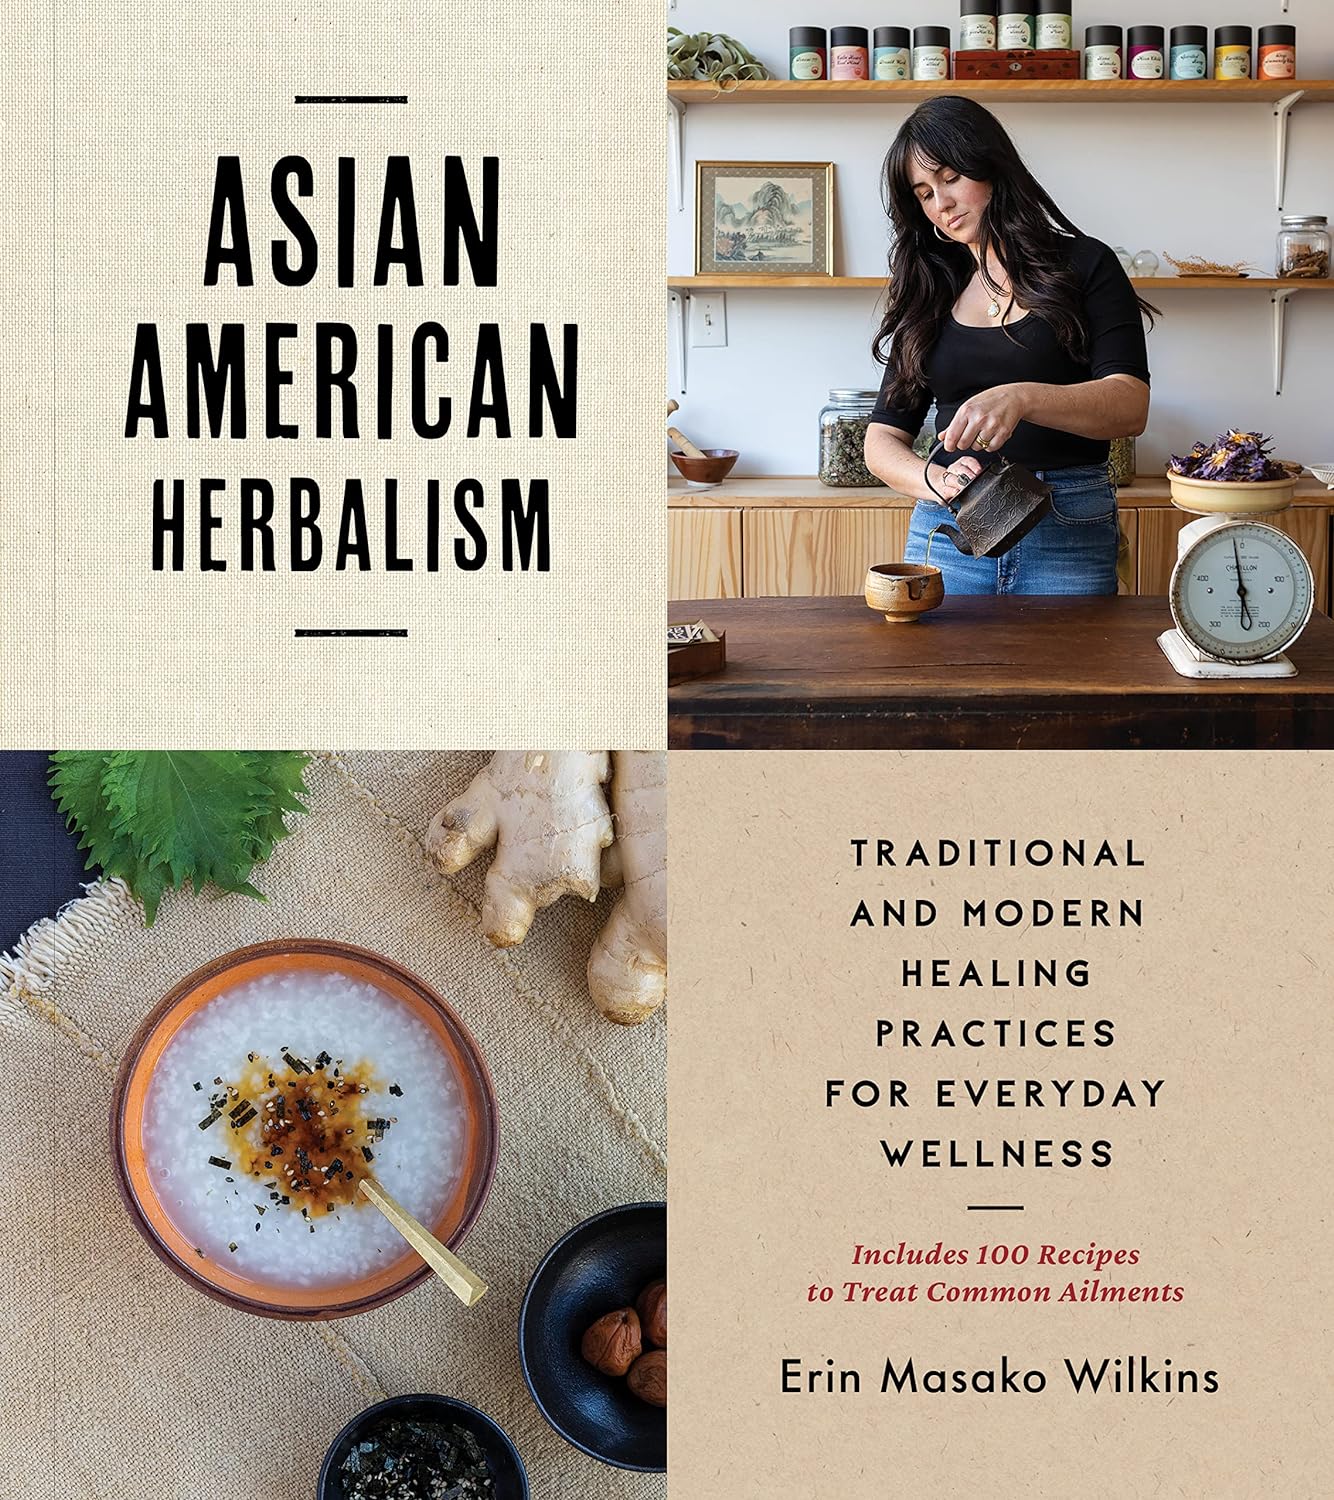 Asian American Herbalism: Traditional and Modern Healing Practices for Everyday Wellness―Includes 100 Recipes to Treat Common Ailments (Erin Masako Wilkins)